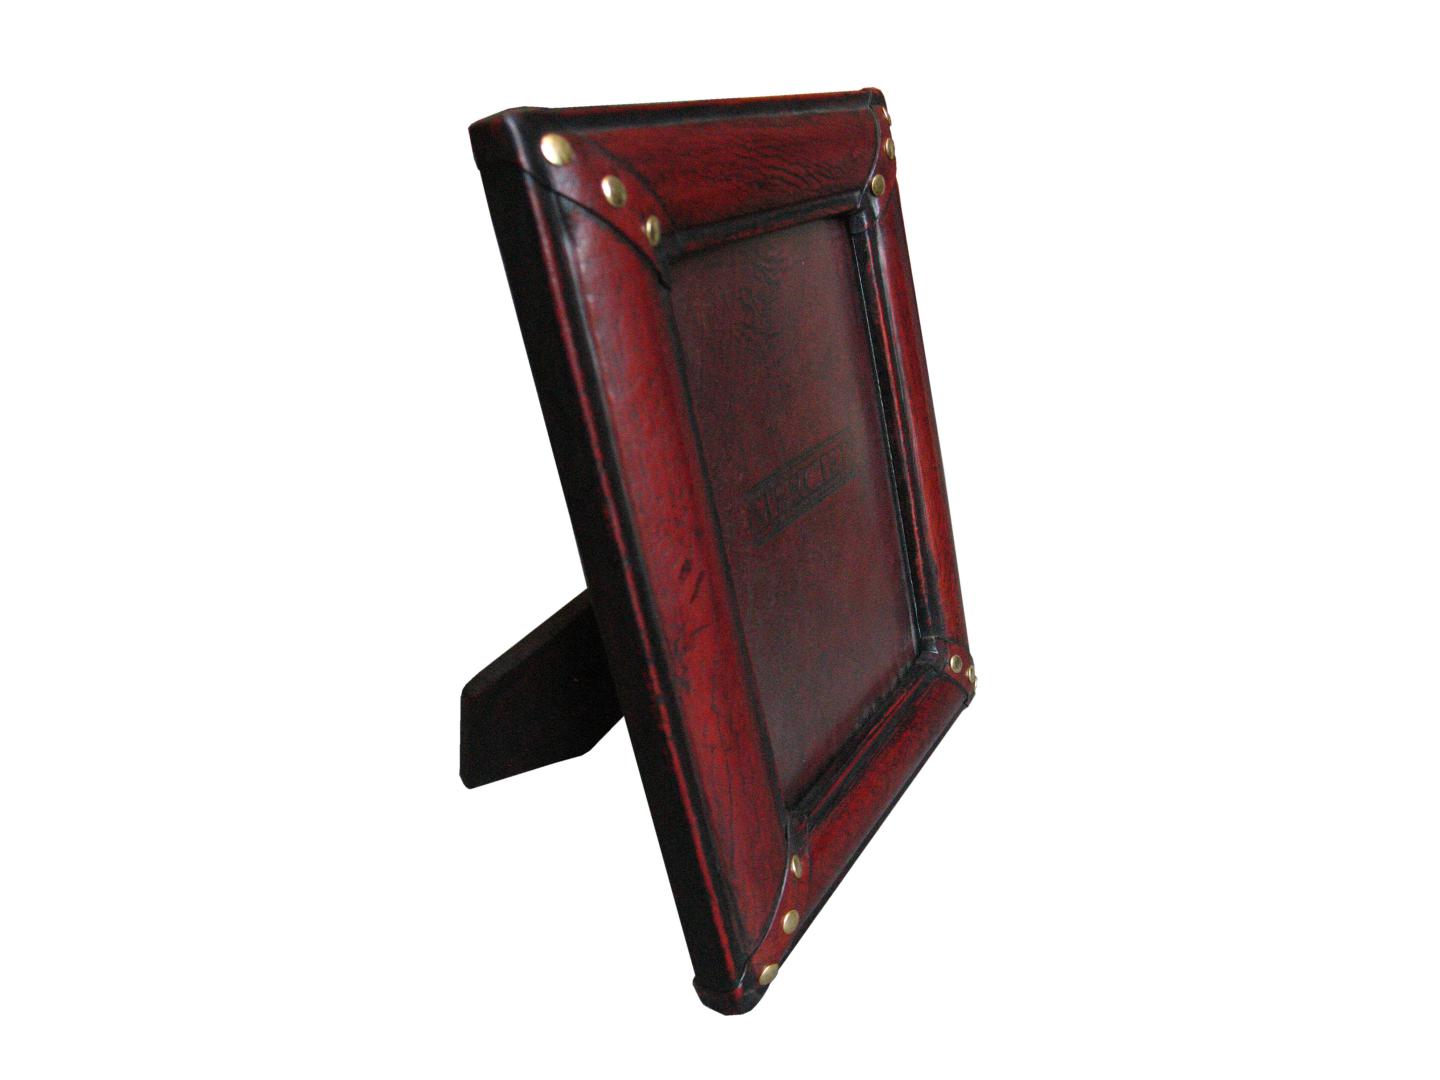 leather photo frame with Distress